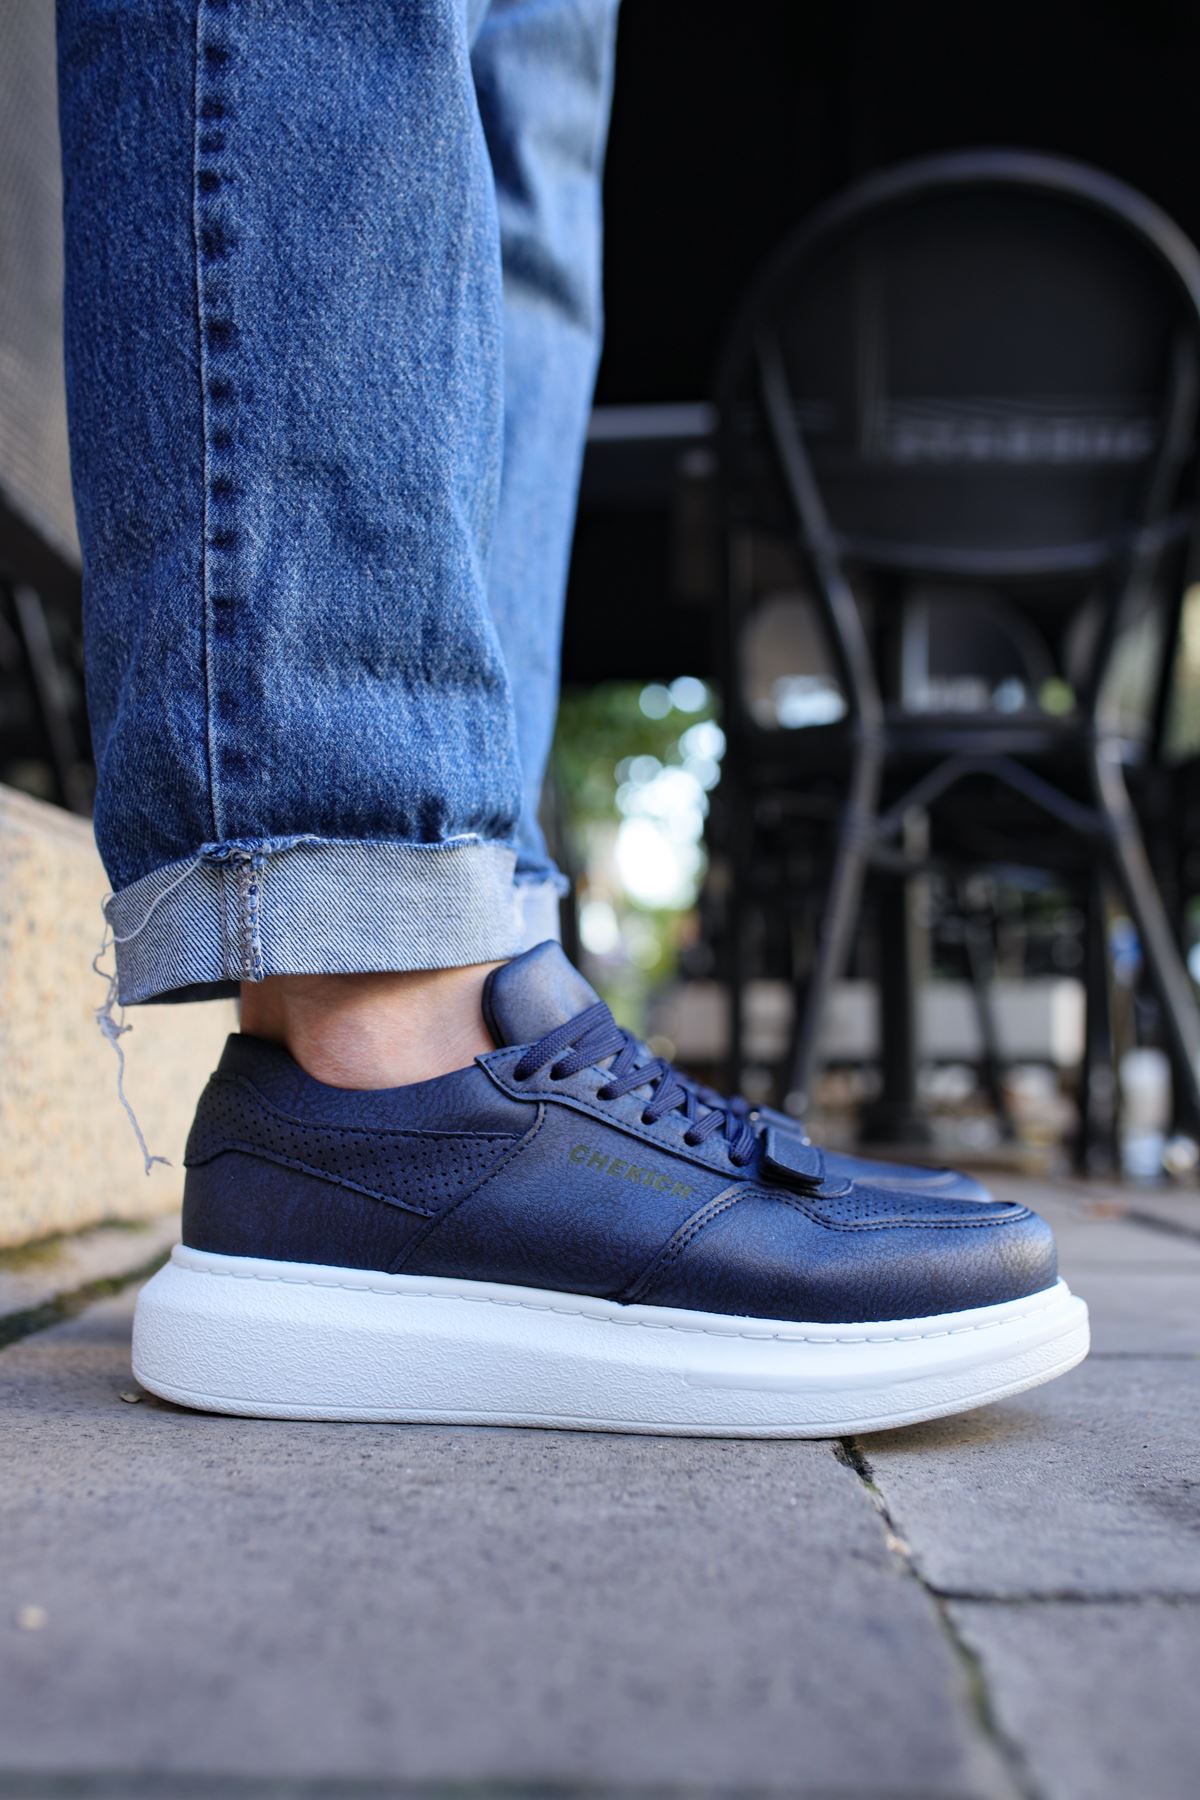 CH073 Men's Unisex Navy Blue Lace-Up Casual Sneaker Sports Shoes - STREETMODE ™